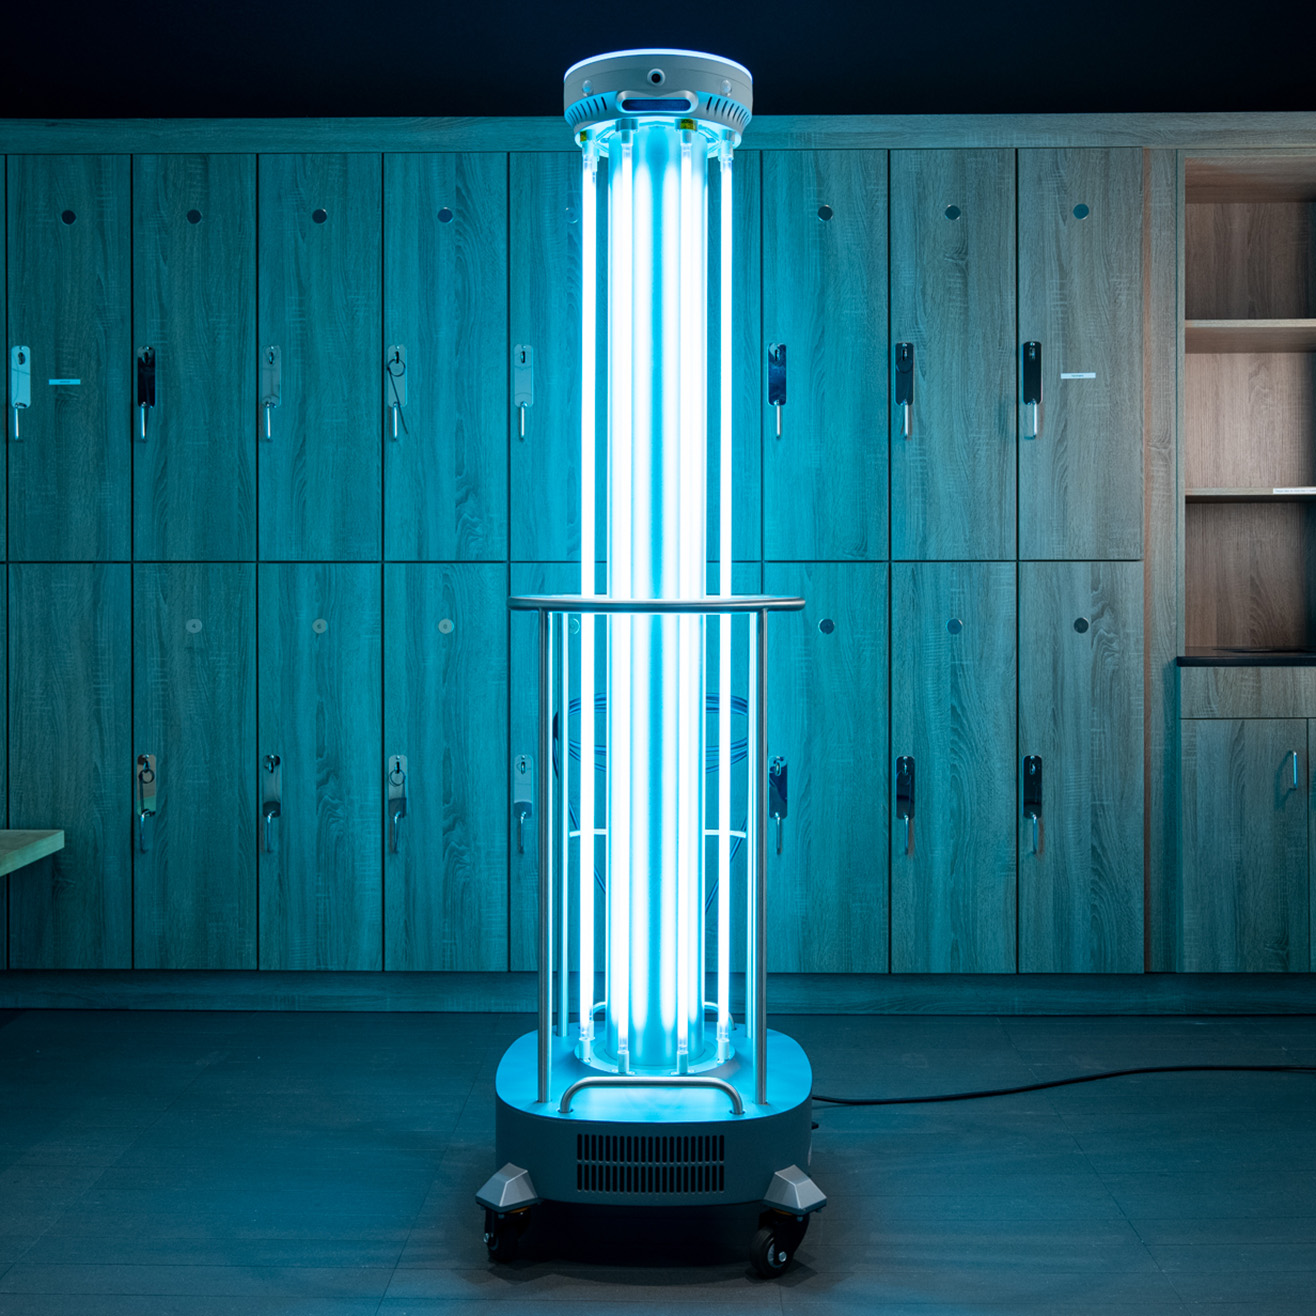 An ADIBOT S1 UV-C disinfection robot with UV-C lamps turned on in a gym locker room.